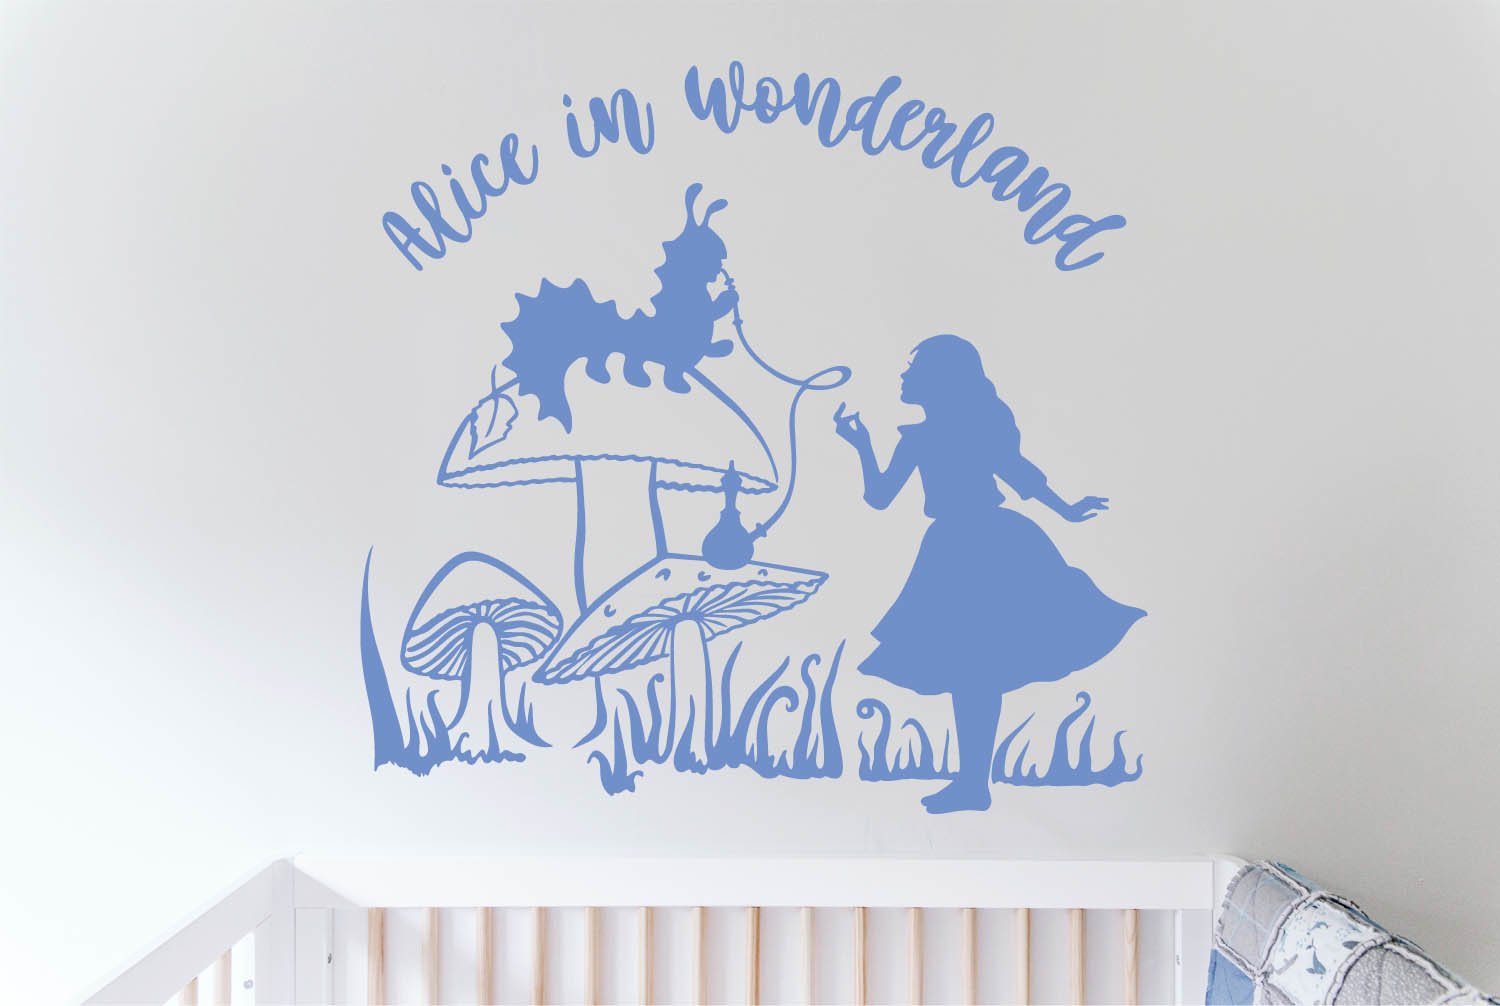 Wonderful images of Alice near a mushroom and an animal.